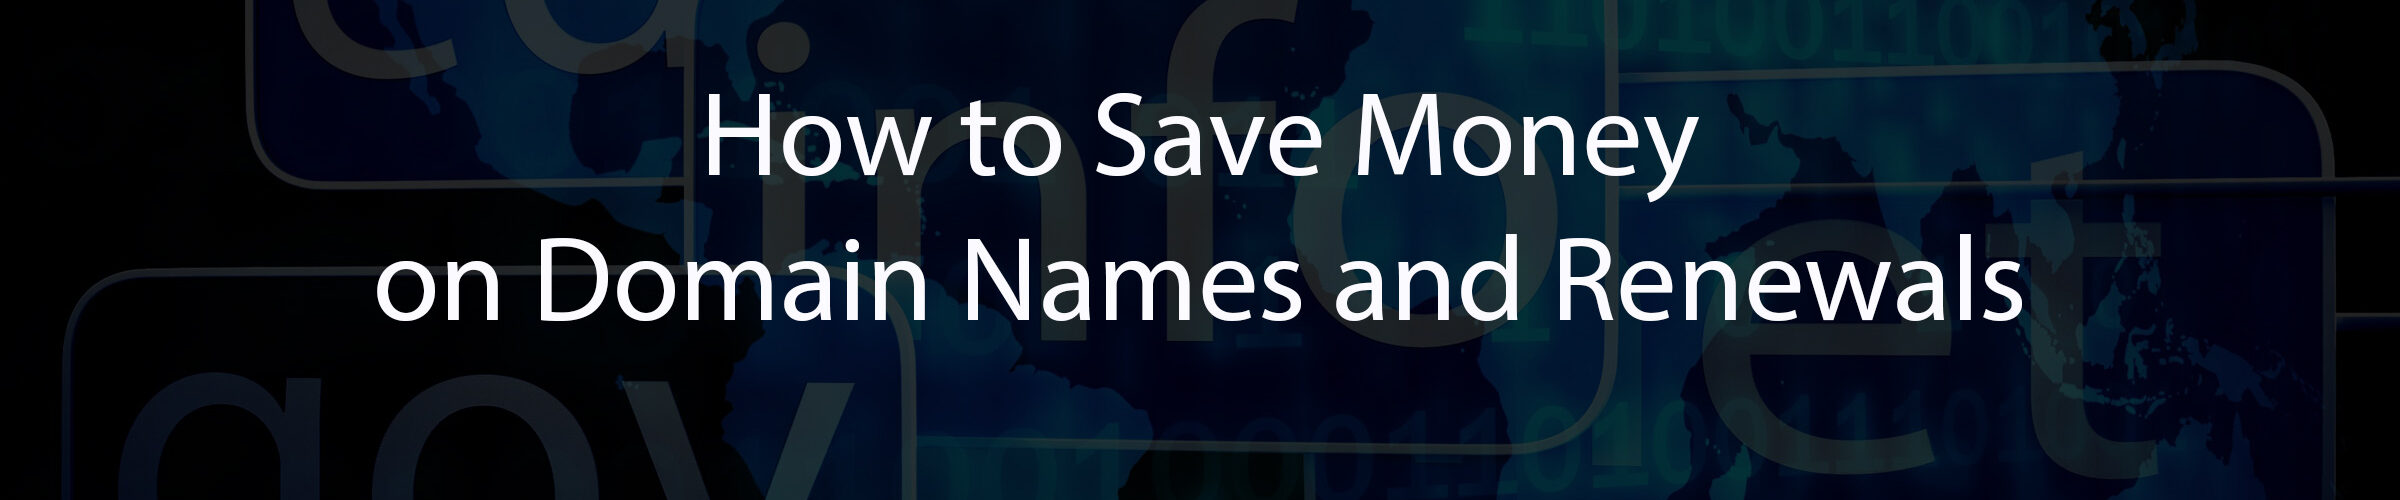 How to Save Money on Domain Names and Renewals